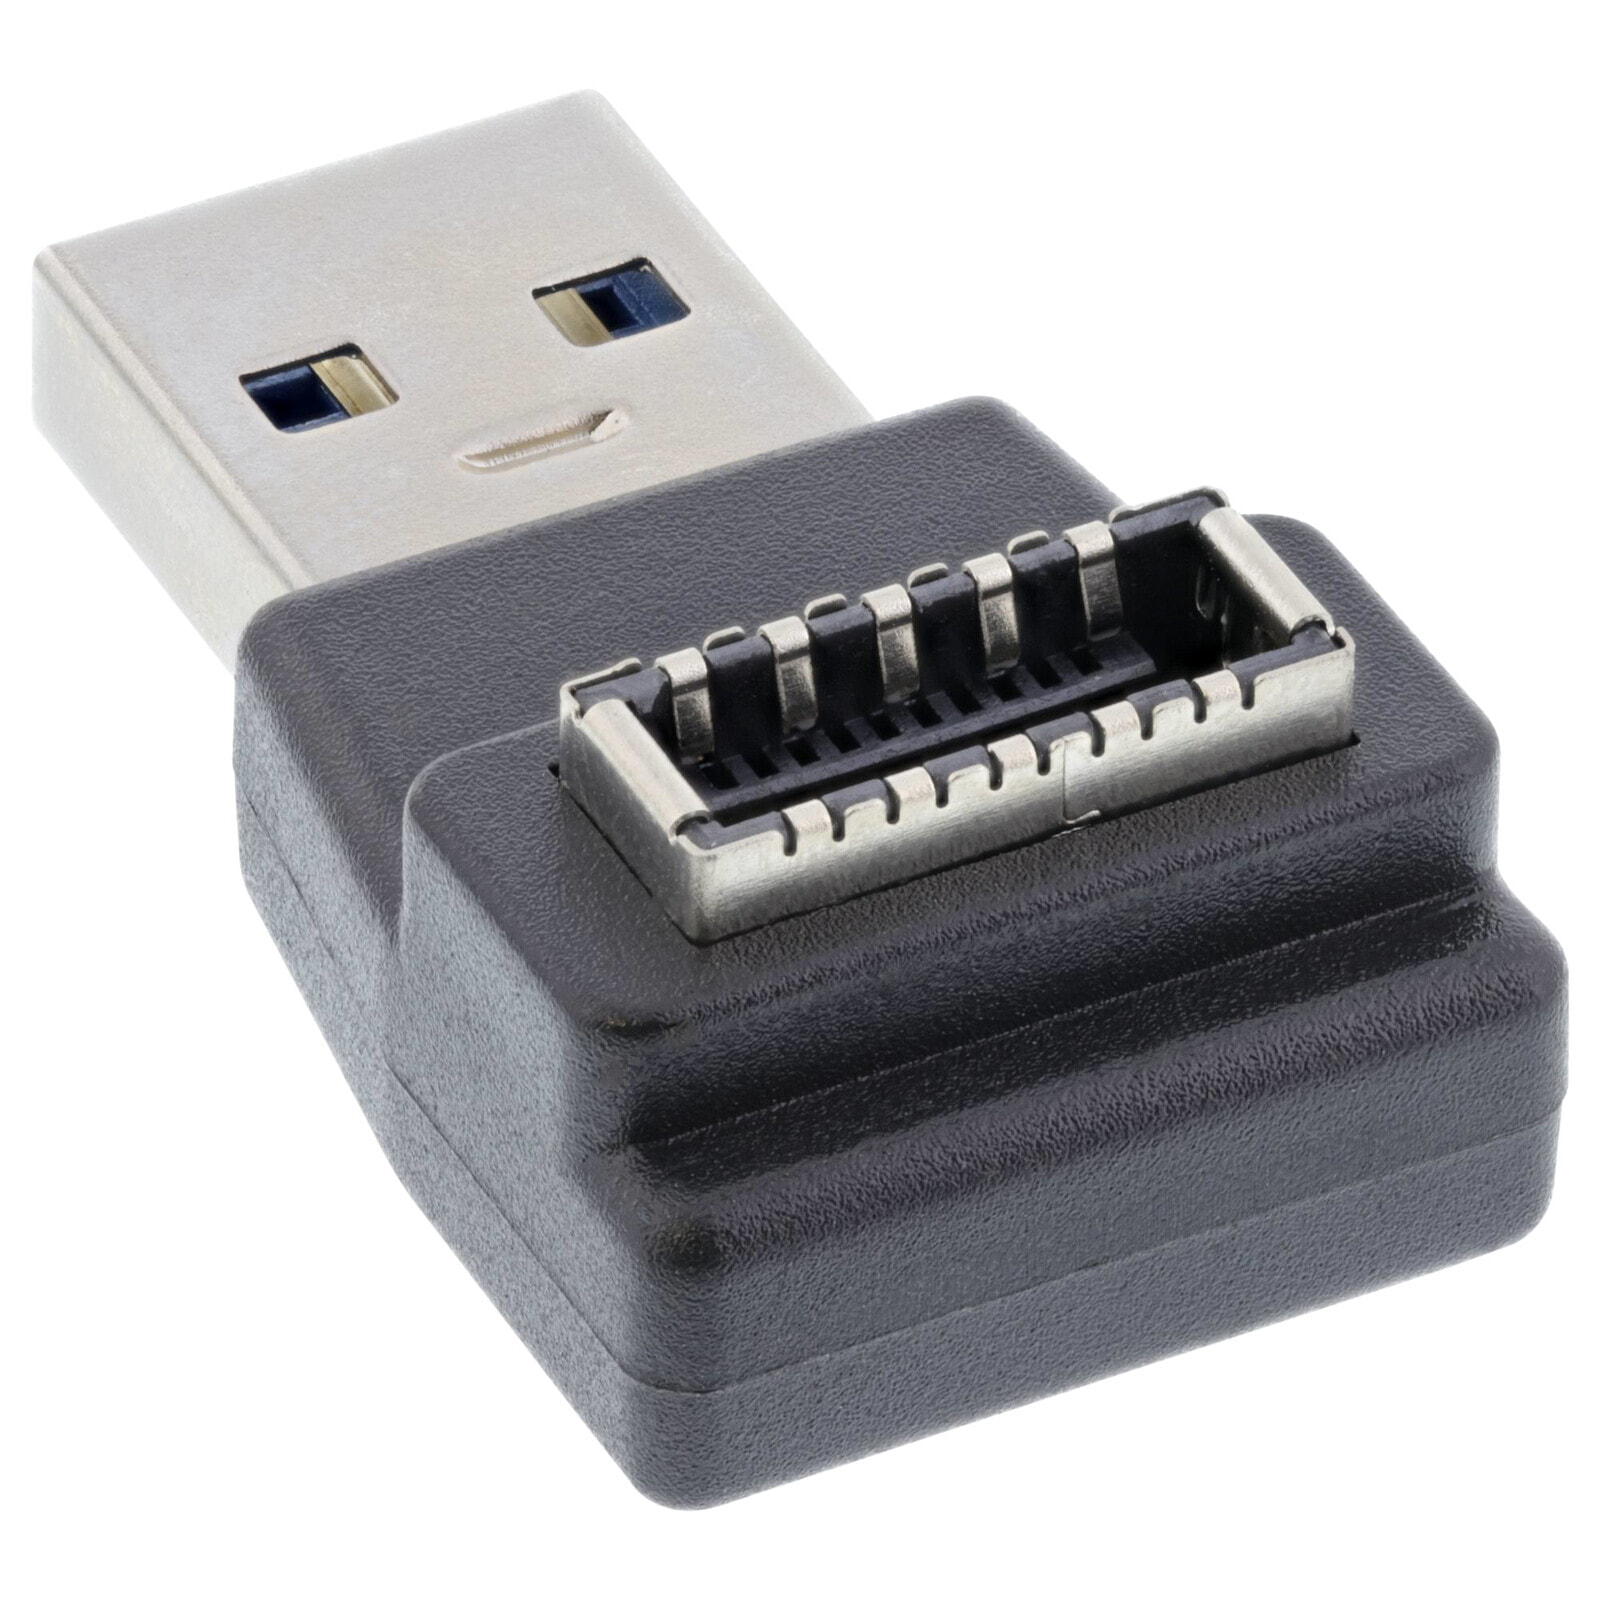 InLine USB 3.2 adapter - USB-A male to internal USB-E front panel socket